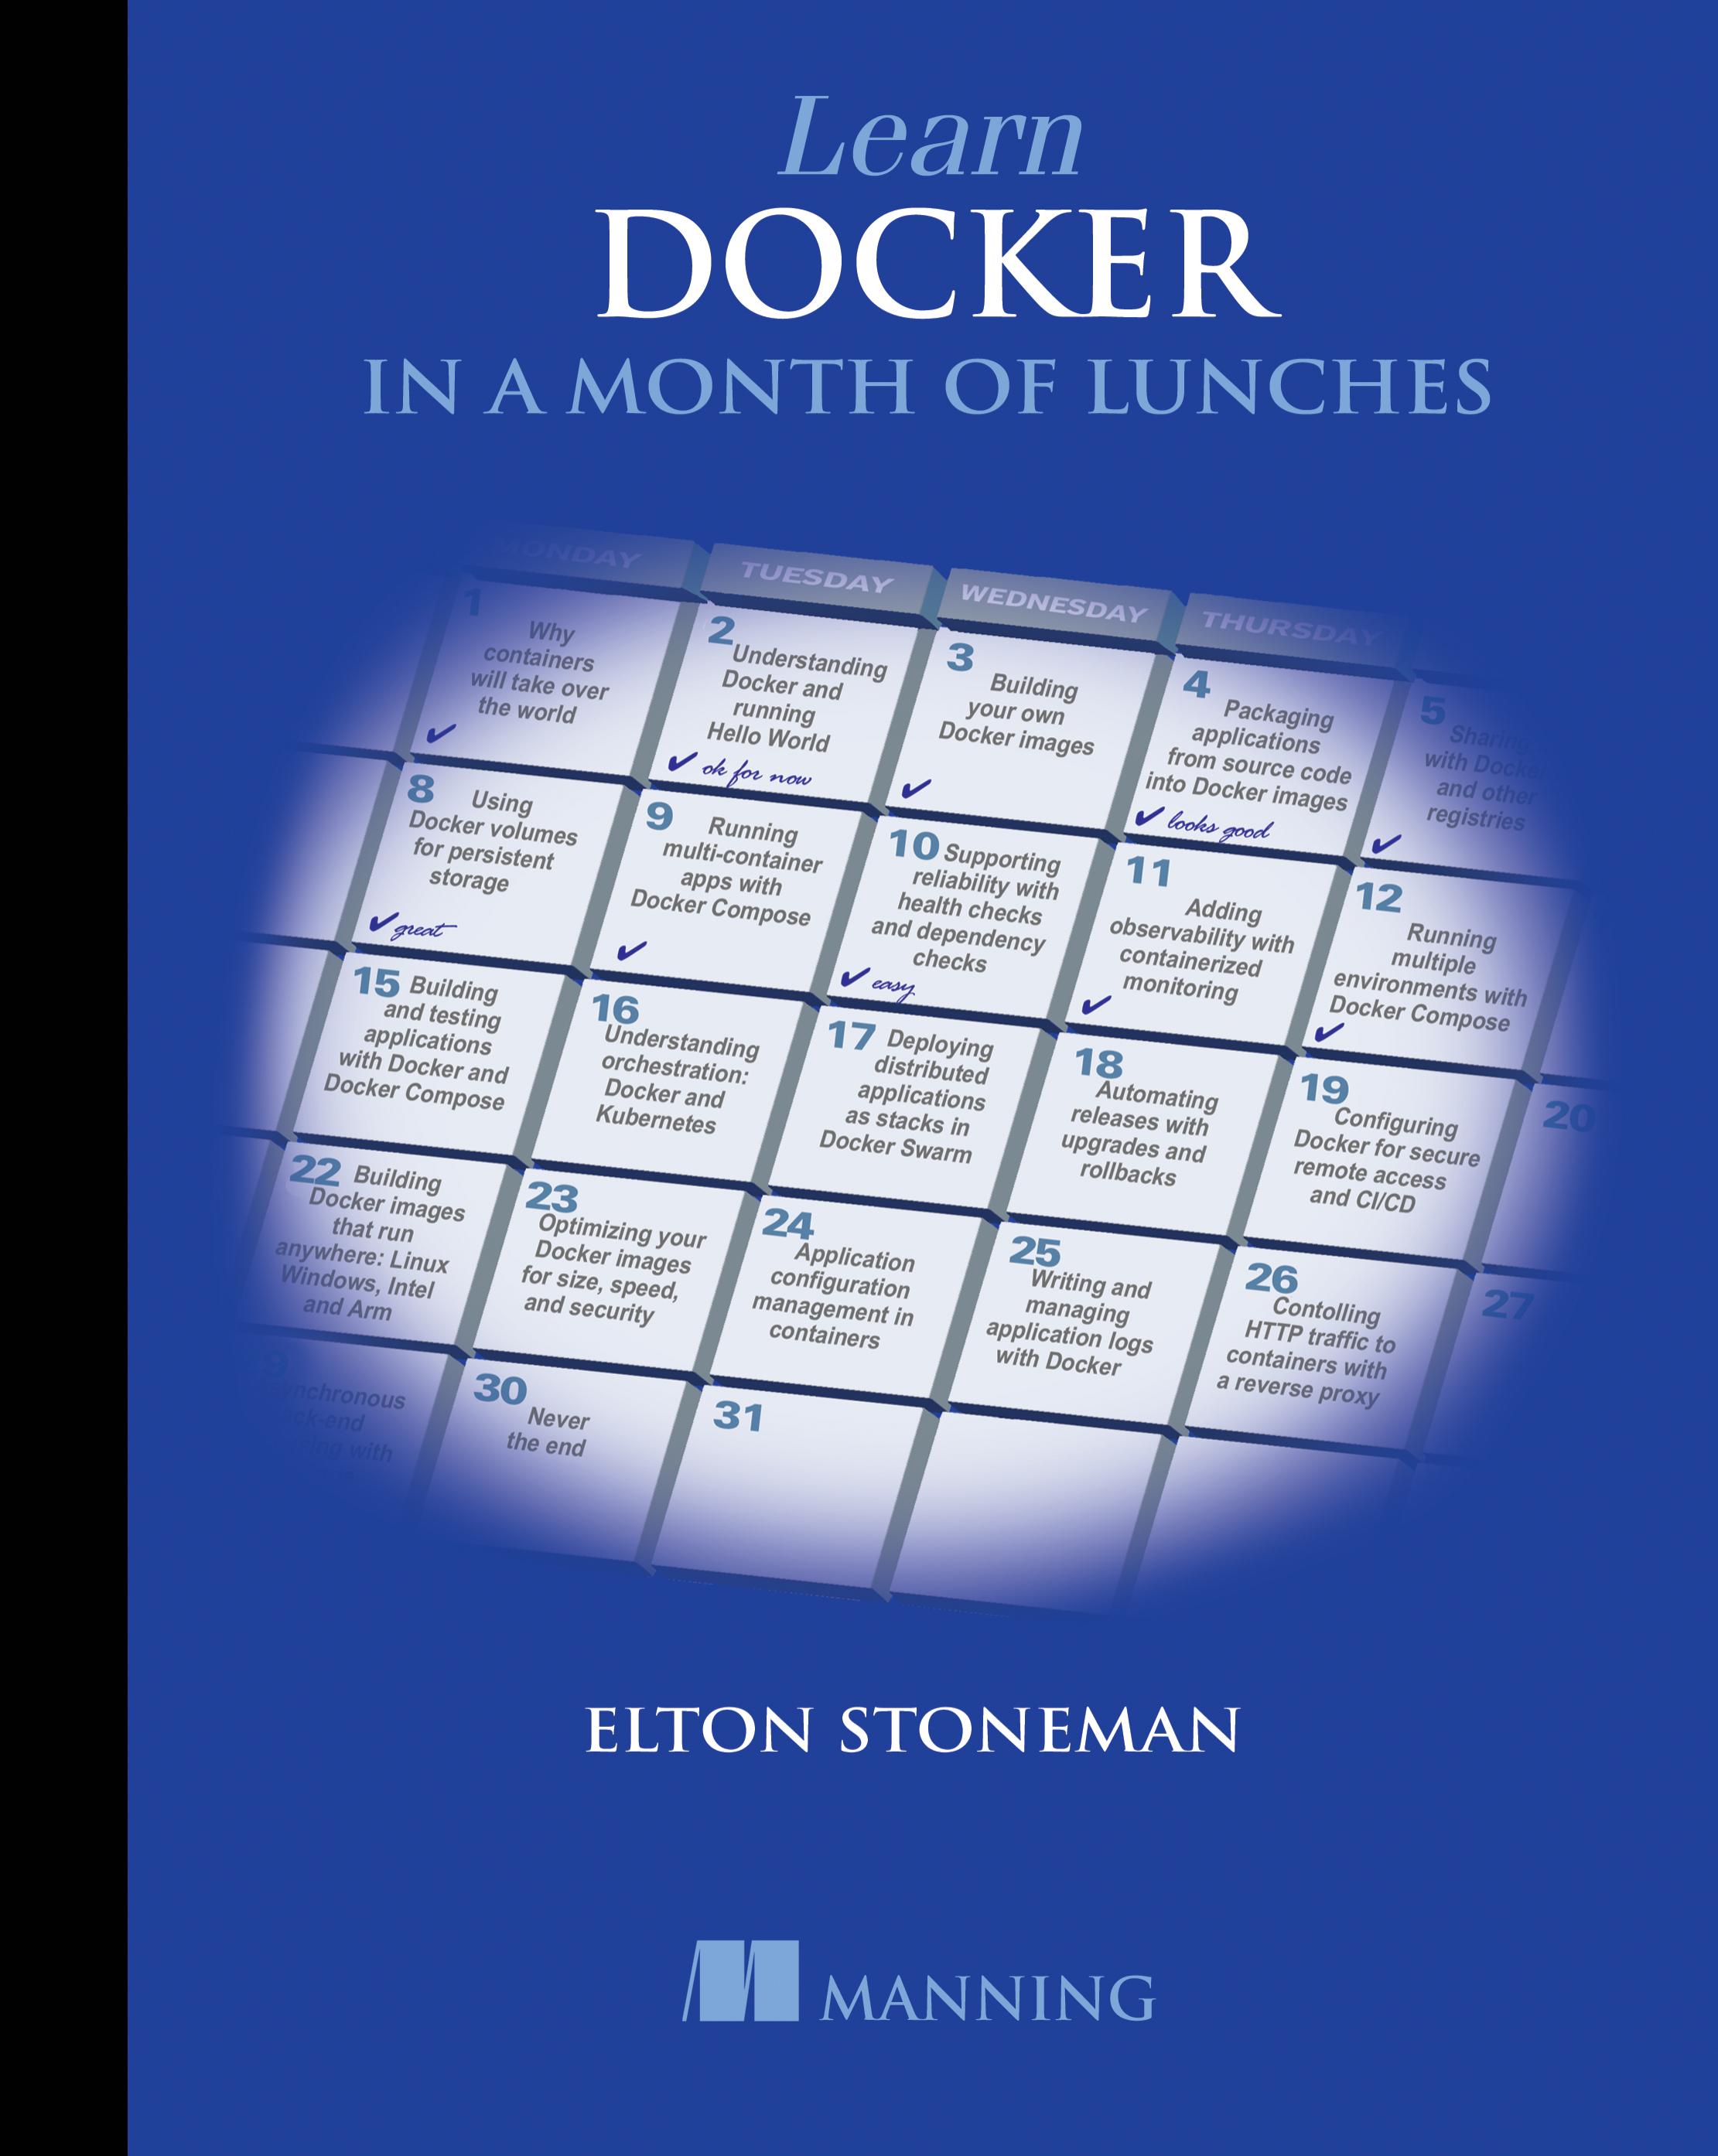 Learn Docker in a Month of Lunches by Elton Stoneman